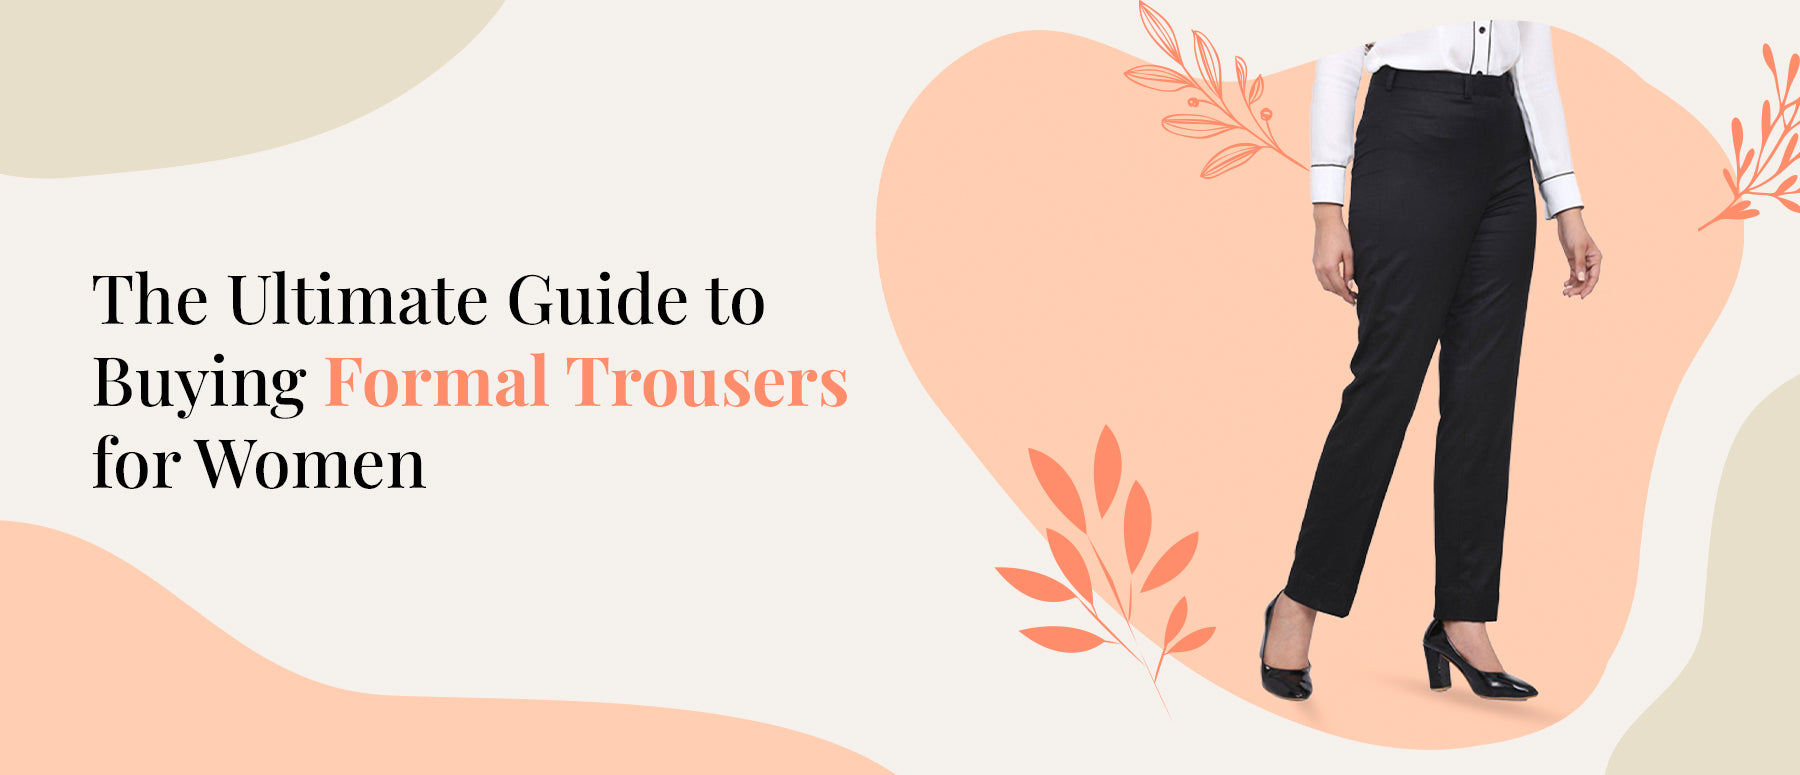 The Ultimate Guide to Buying Formal Trousers for Women